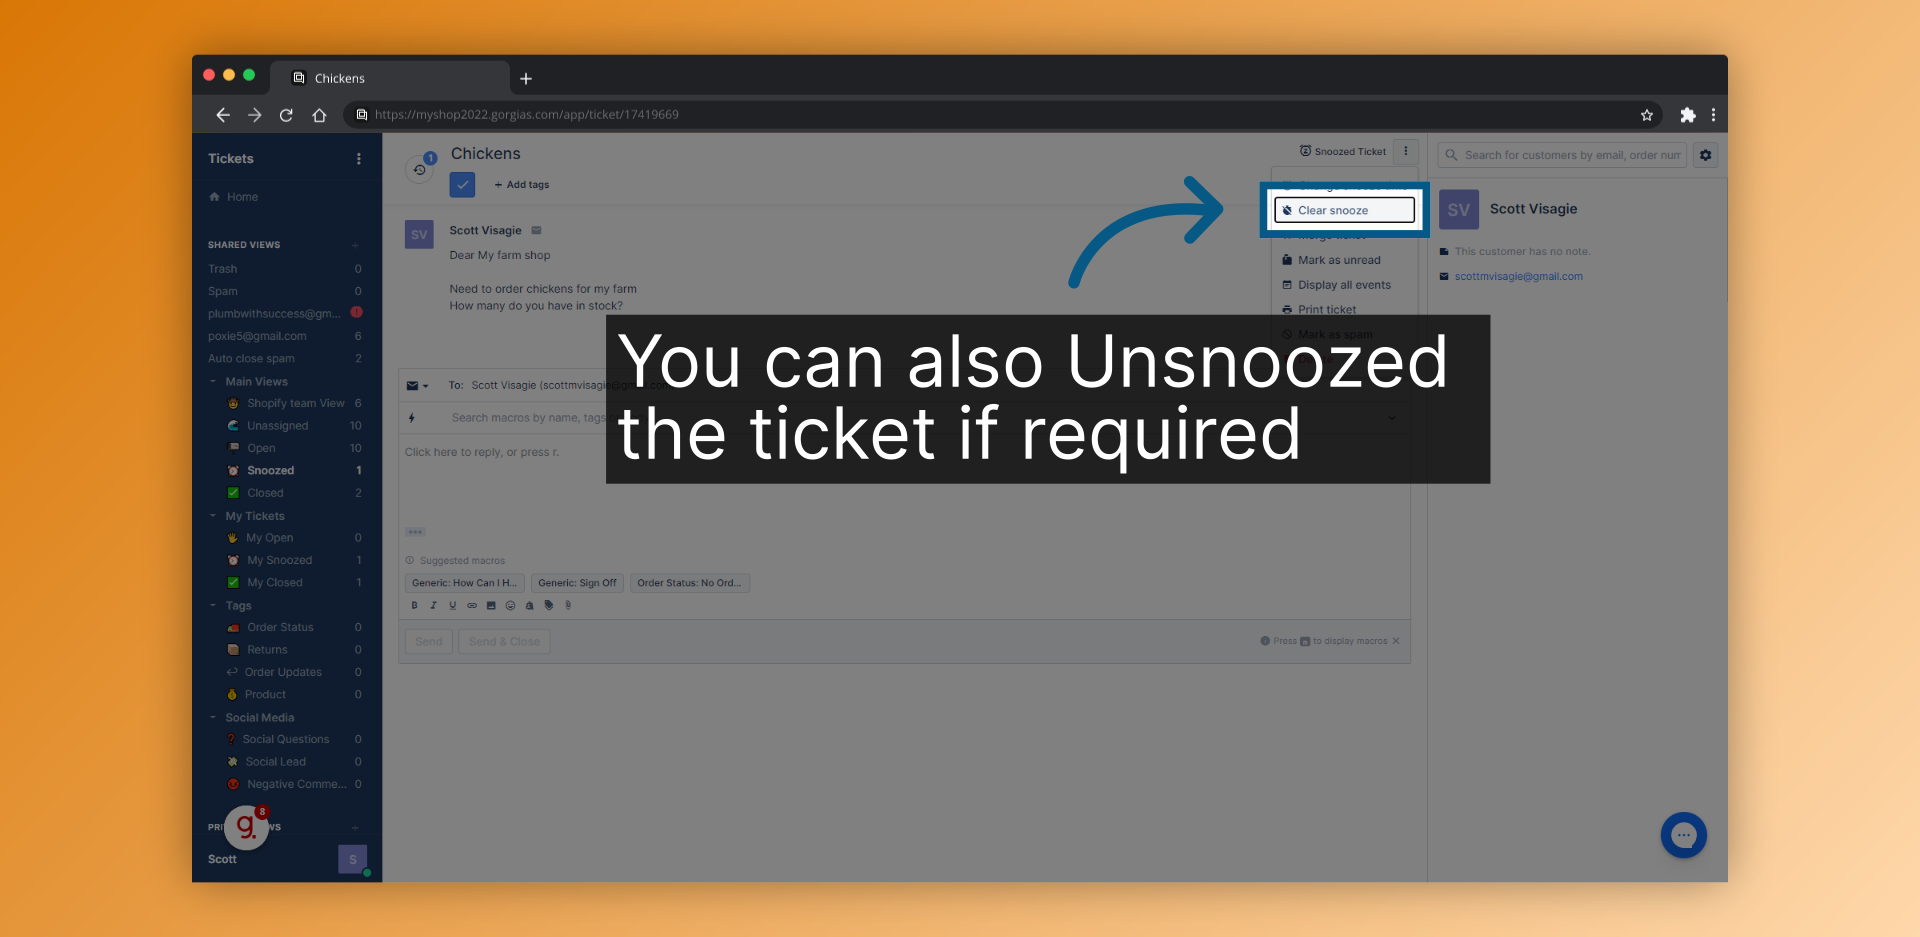 You can also Unsnoozed the ticket if required